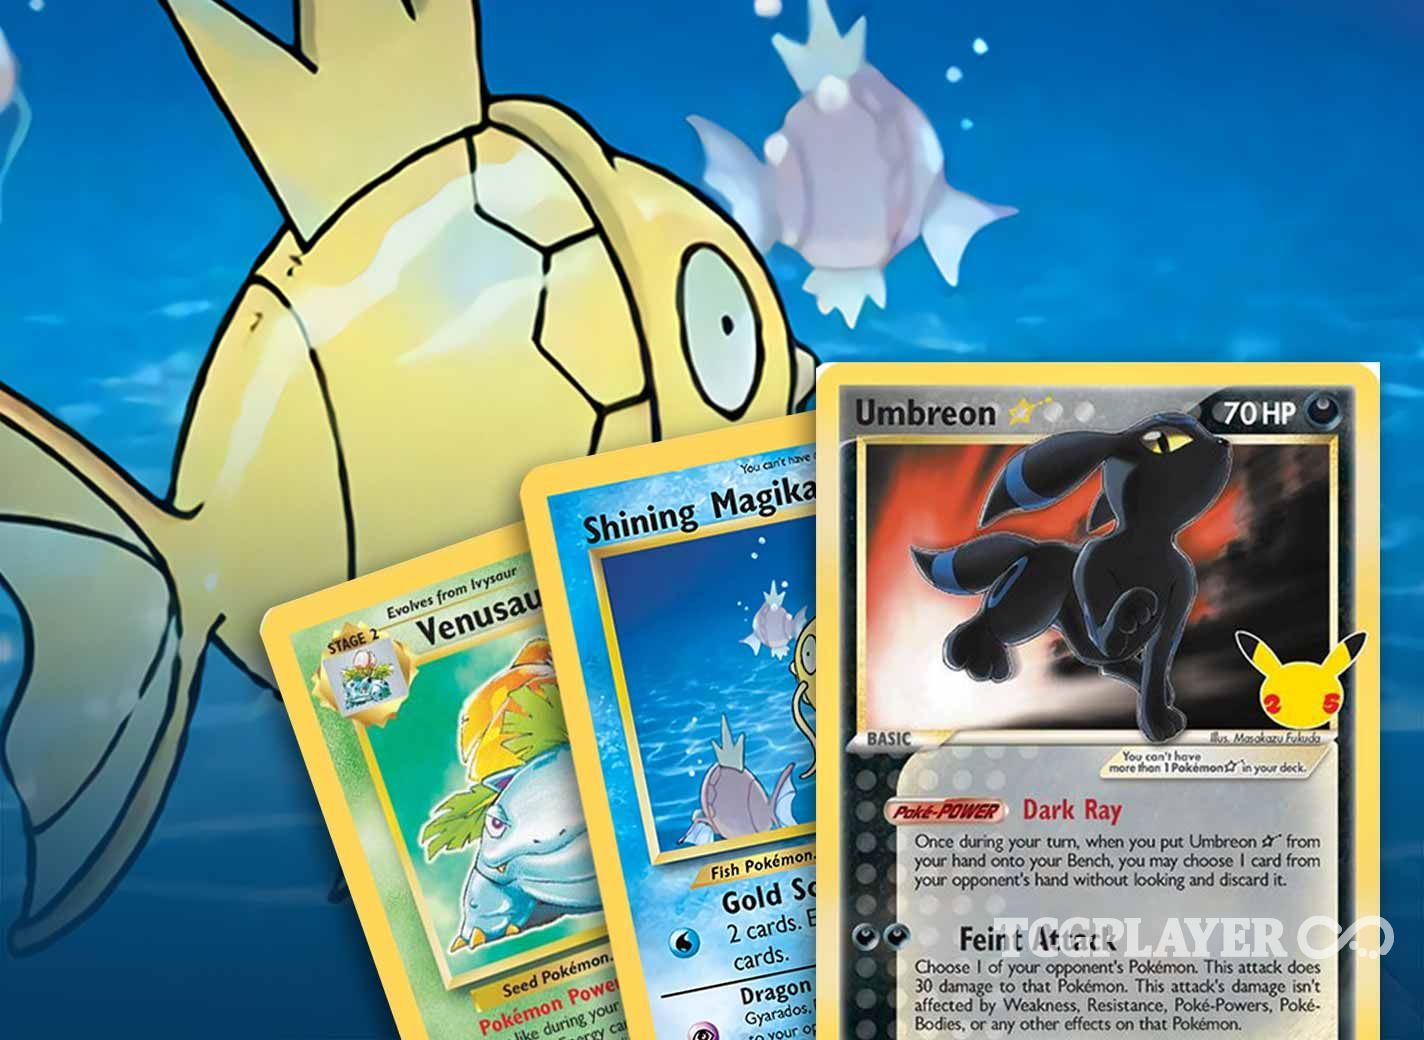 Pokemon TCG players are getting insane rare card pulls from Advent